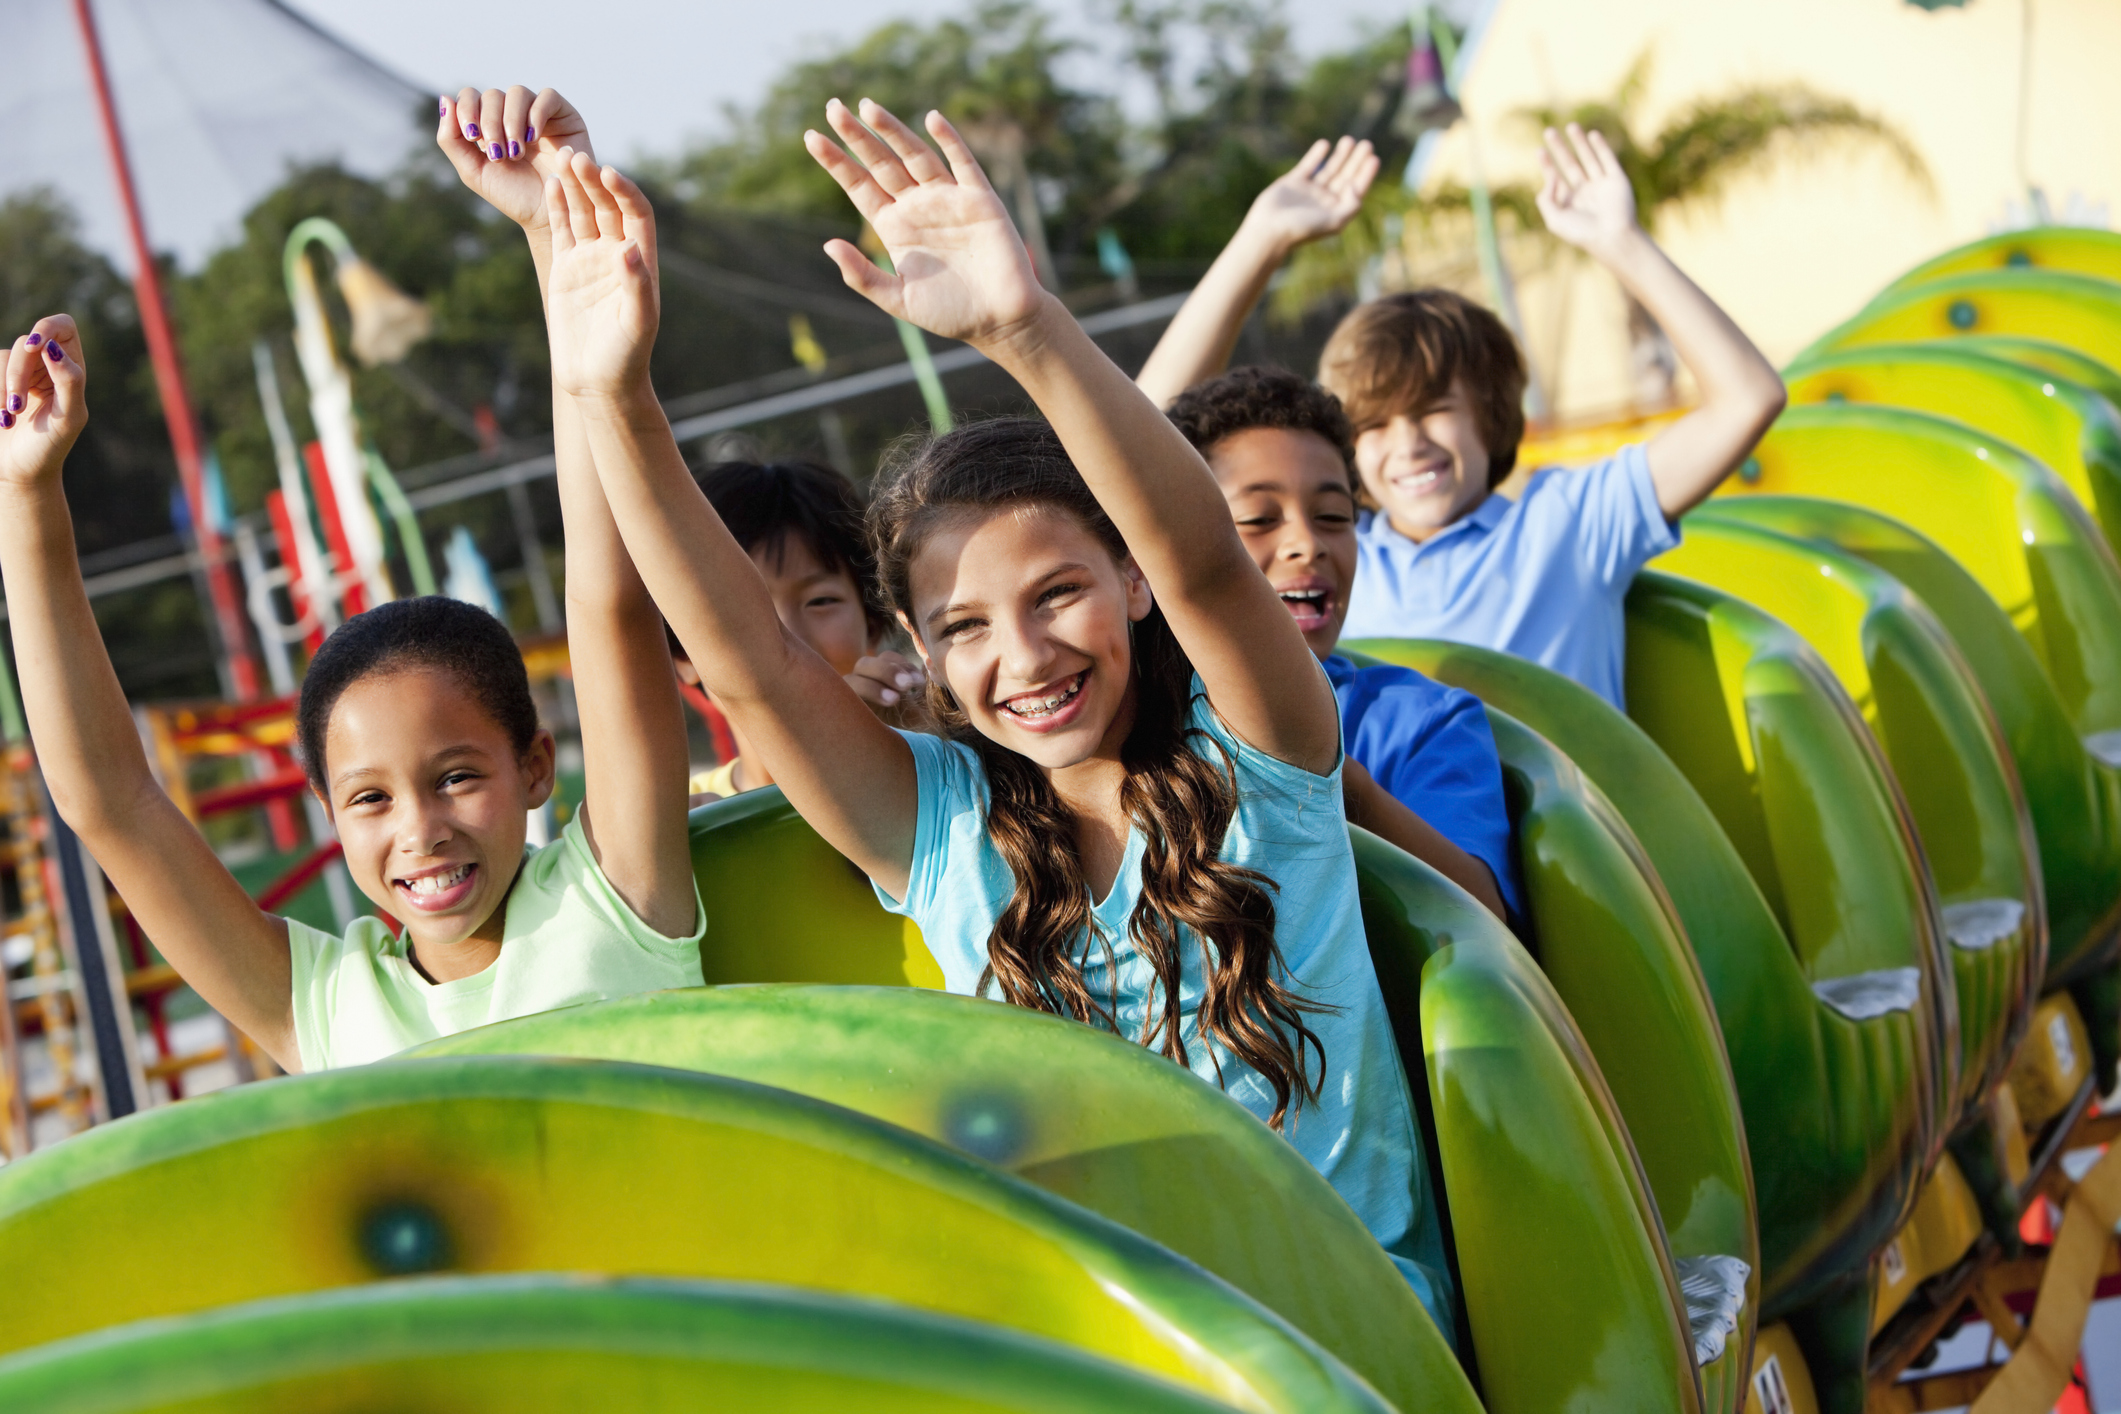 Insurance for Amusement Devices and Rides